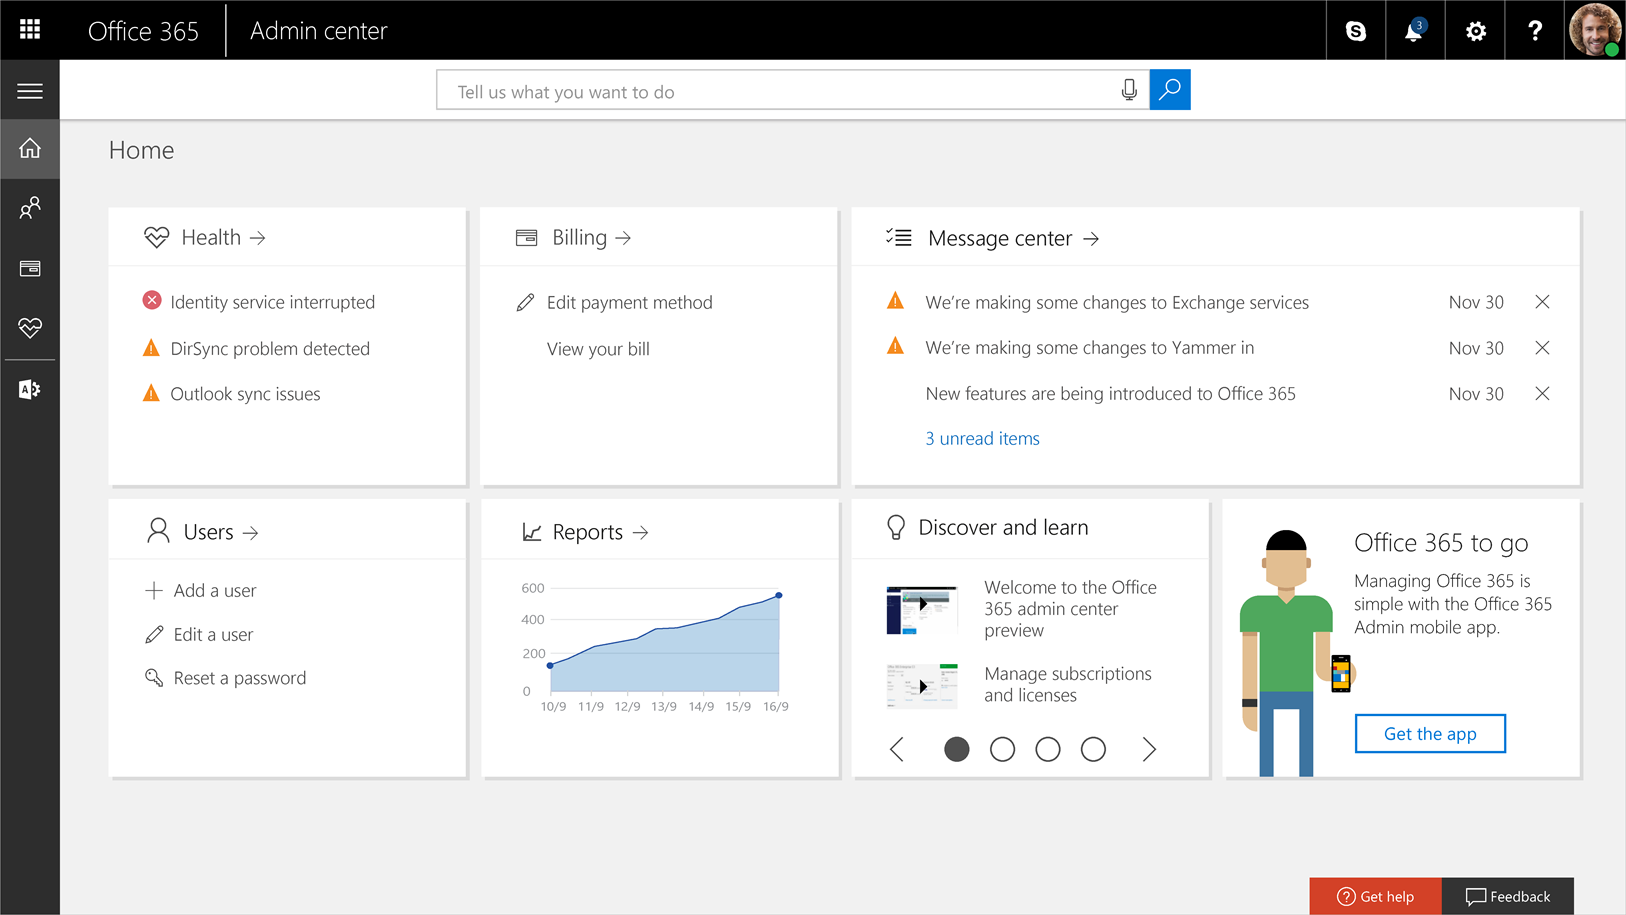 Announcing the new Office 365 admin center | Microsoft 365 Blog